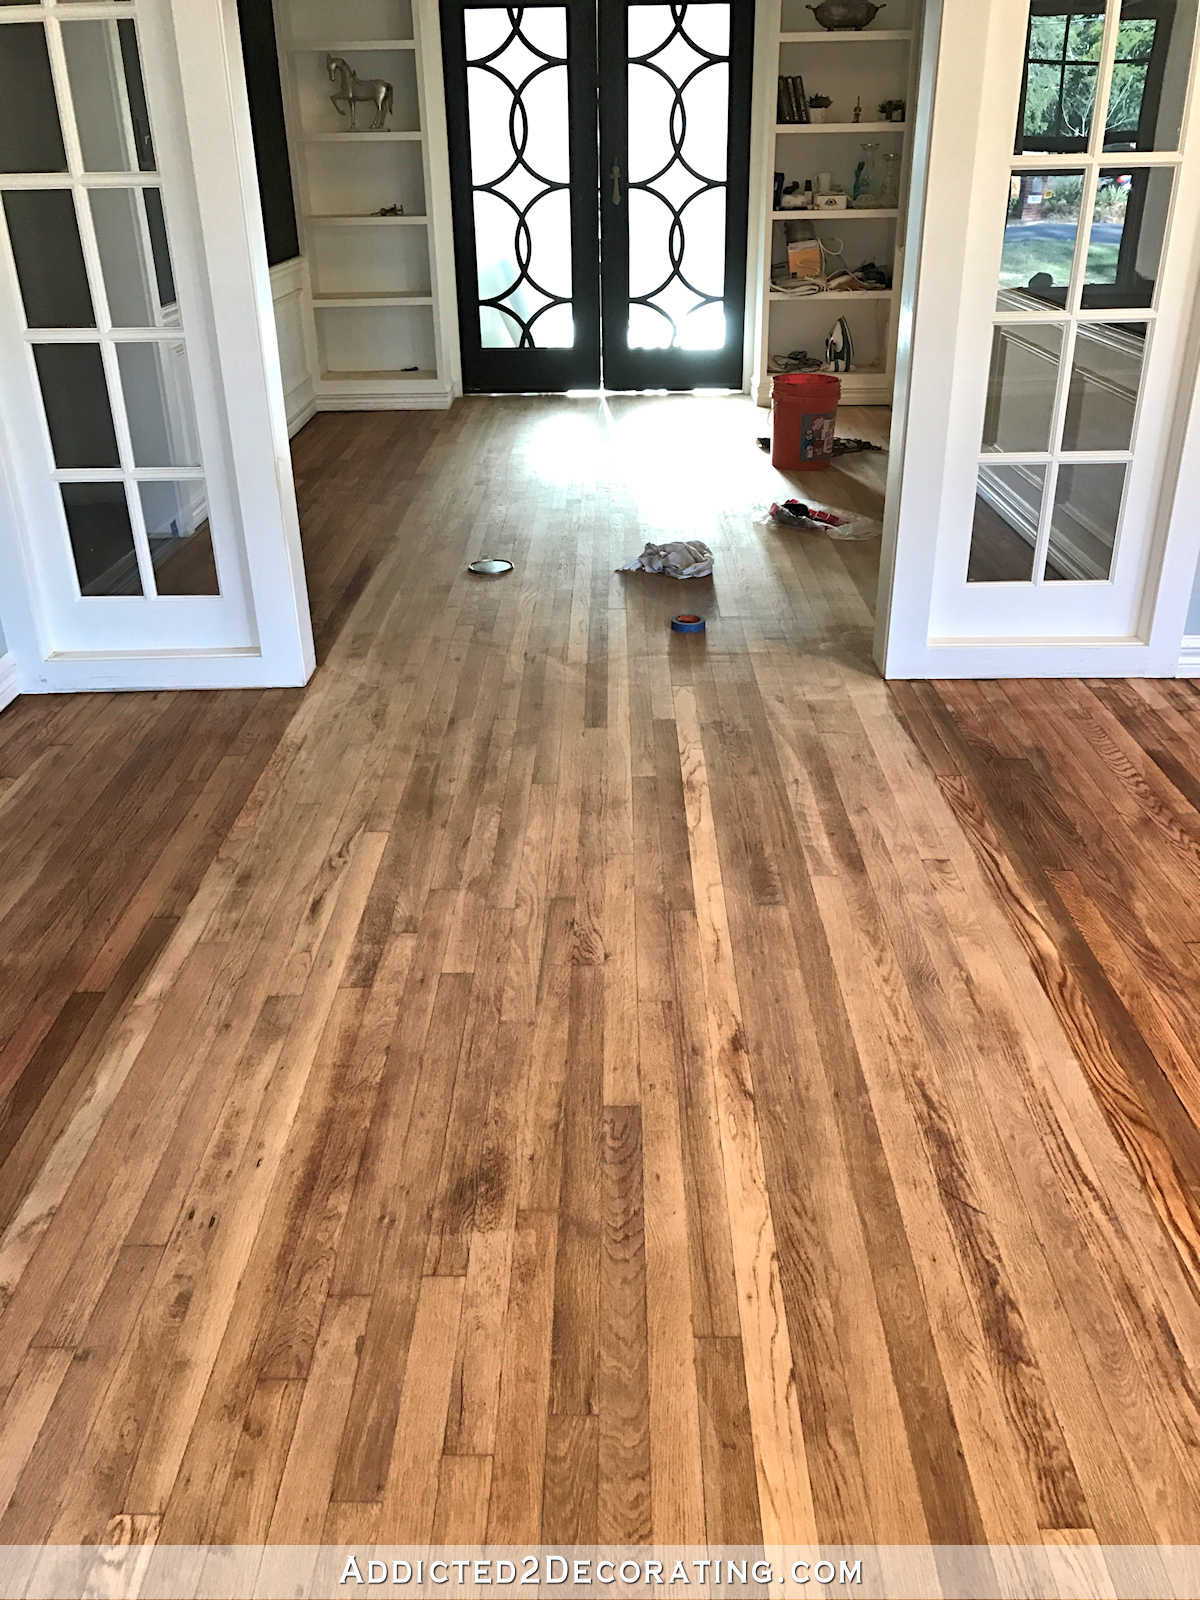 old hardwood floor ideas of adventures in staining my red oak hardwood floors products process with staining red oak hardwood floors 5 music room wood conditioner